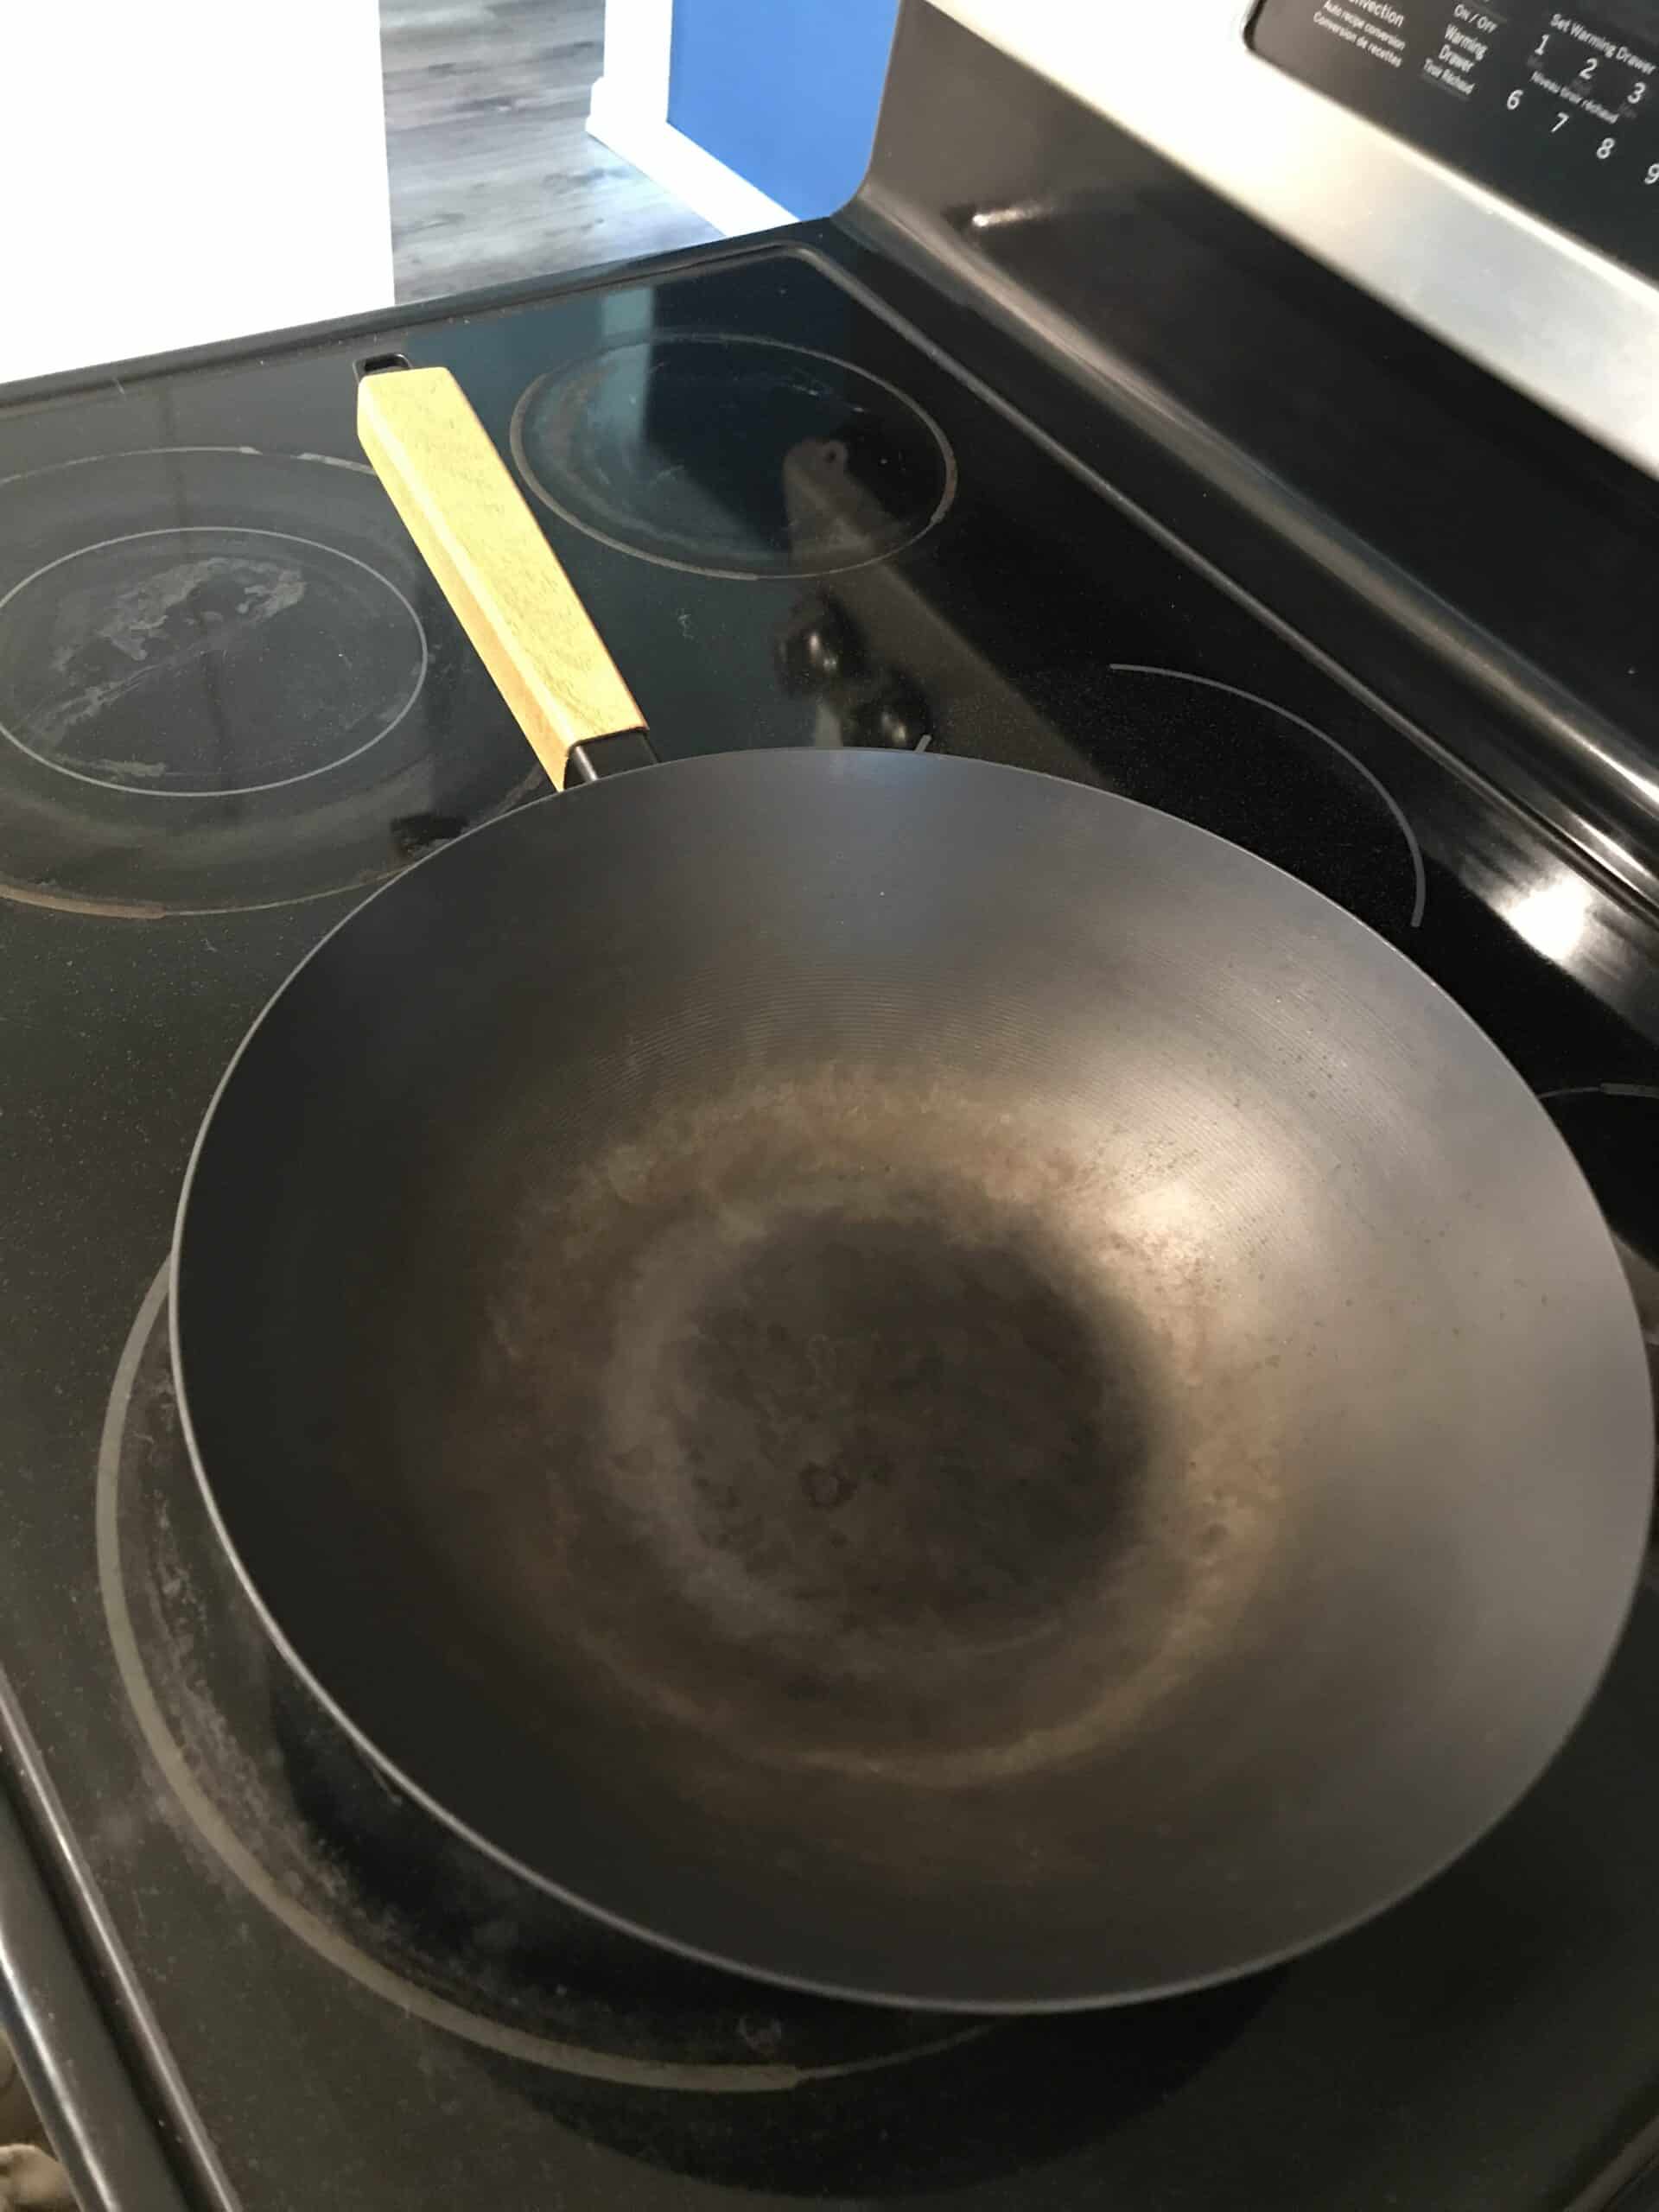 Xtrema Non-Toxic Cookware Review [Staff Tested] - LeafScore